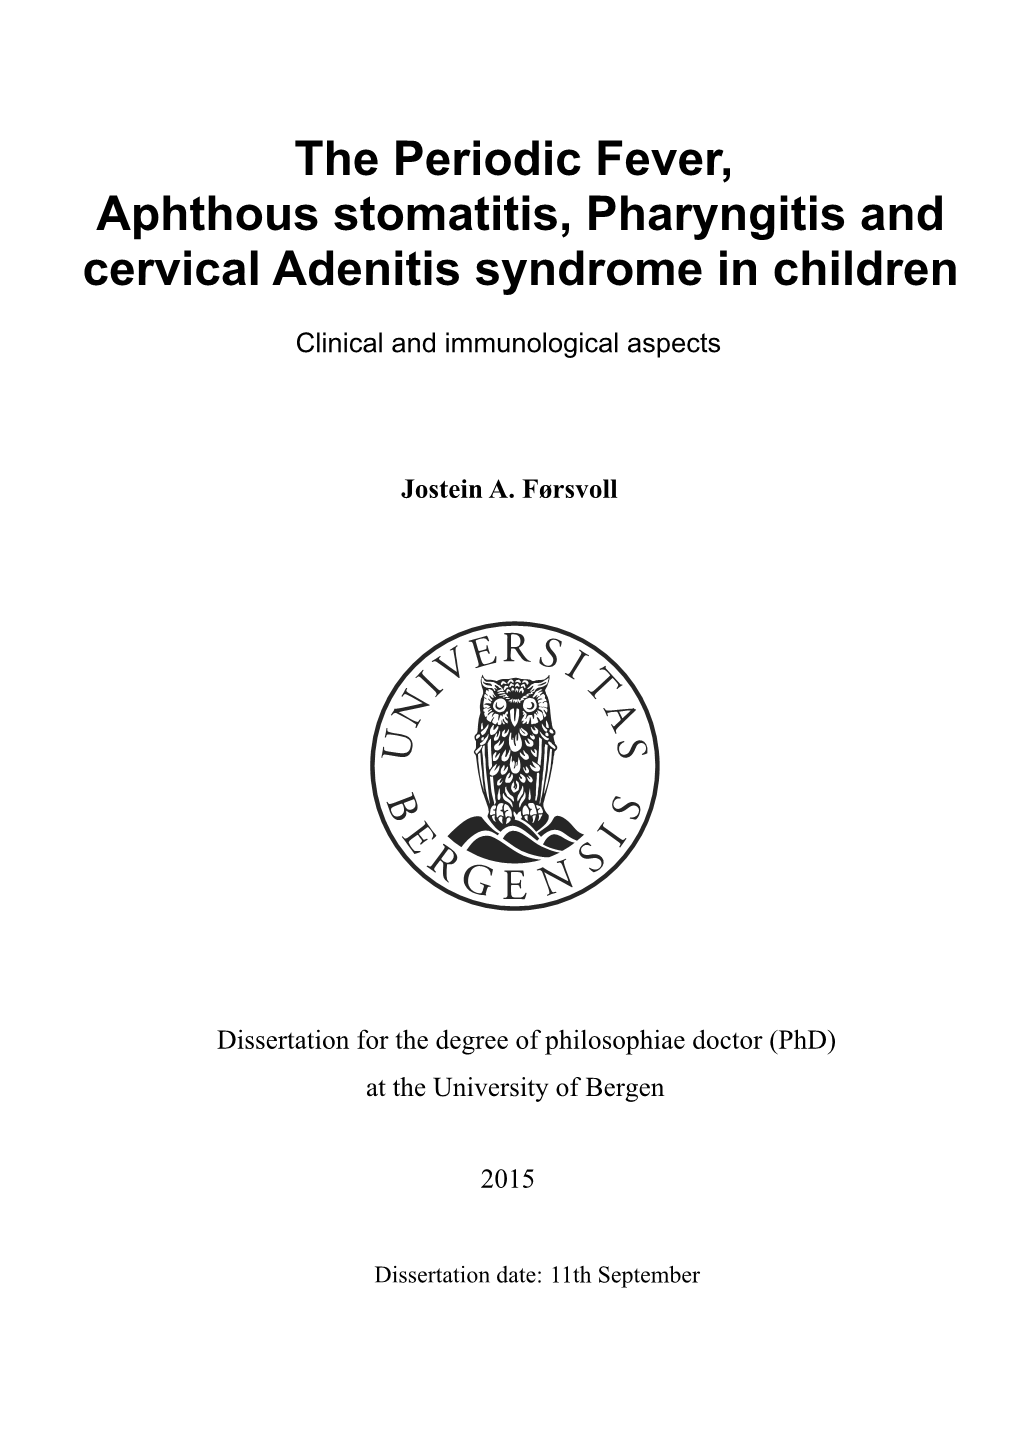 The Periodic Fever, Aphthous Stomatitis, Pharyngitis and Cervical Adenitis (PFAPA) Syndrome, First Described in 1987, Is Defined by Clinical Criteria